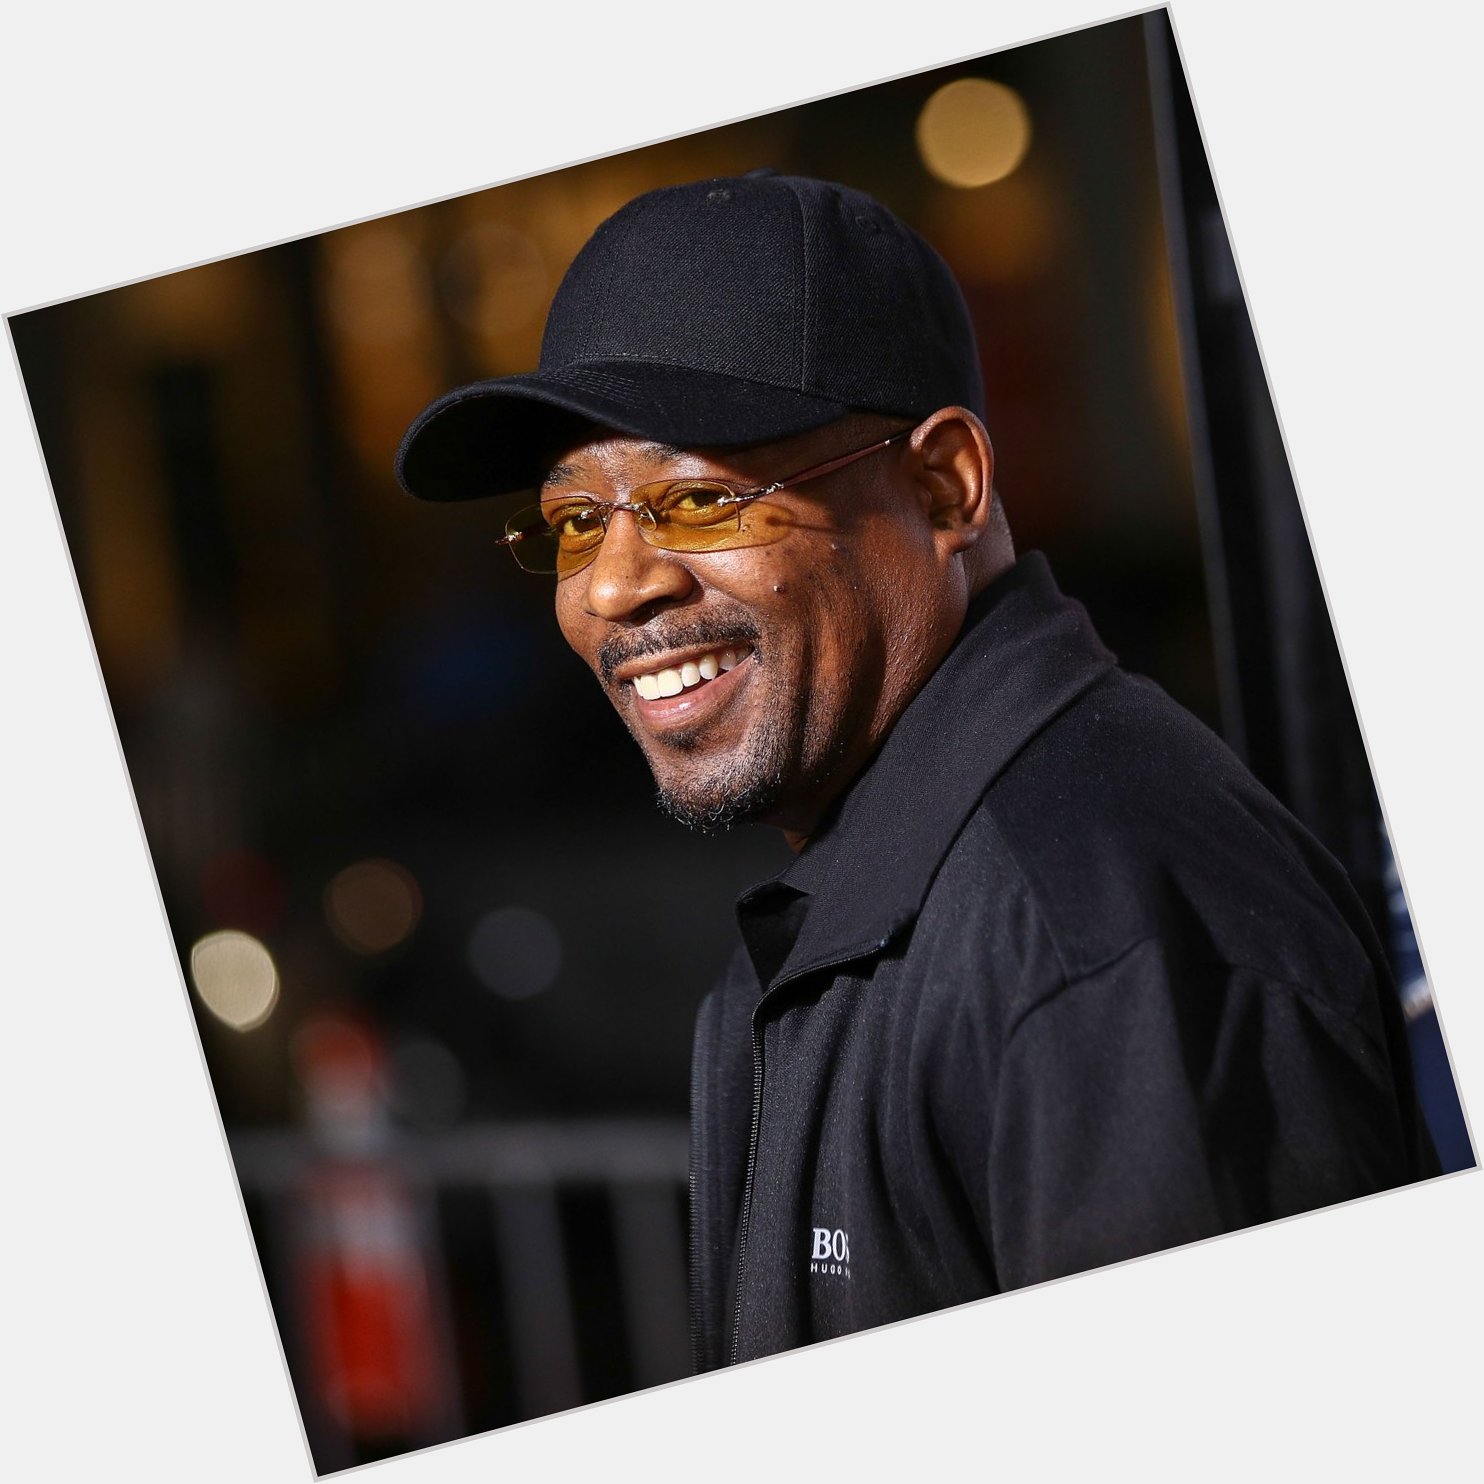   wishes Martin Lawrence, a very happy birthday   